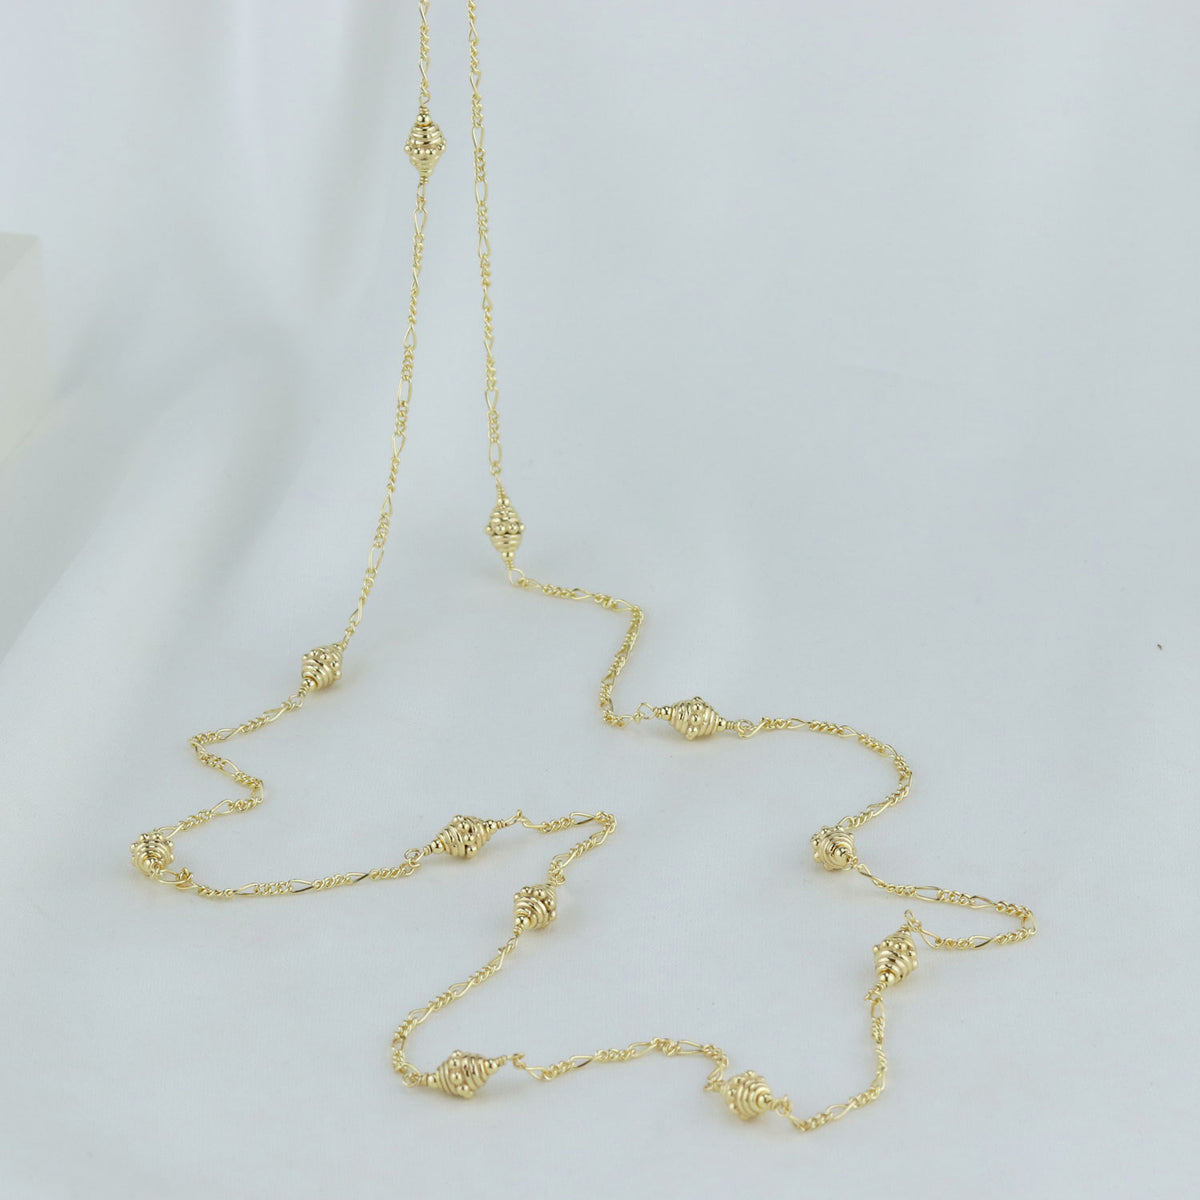 Long Necklace with Granulated Beads